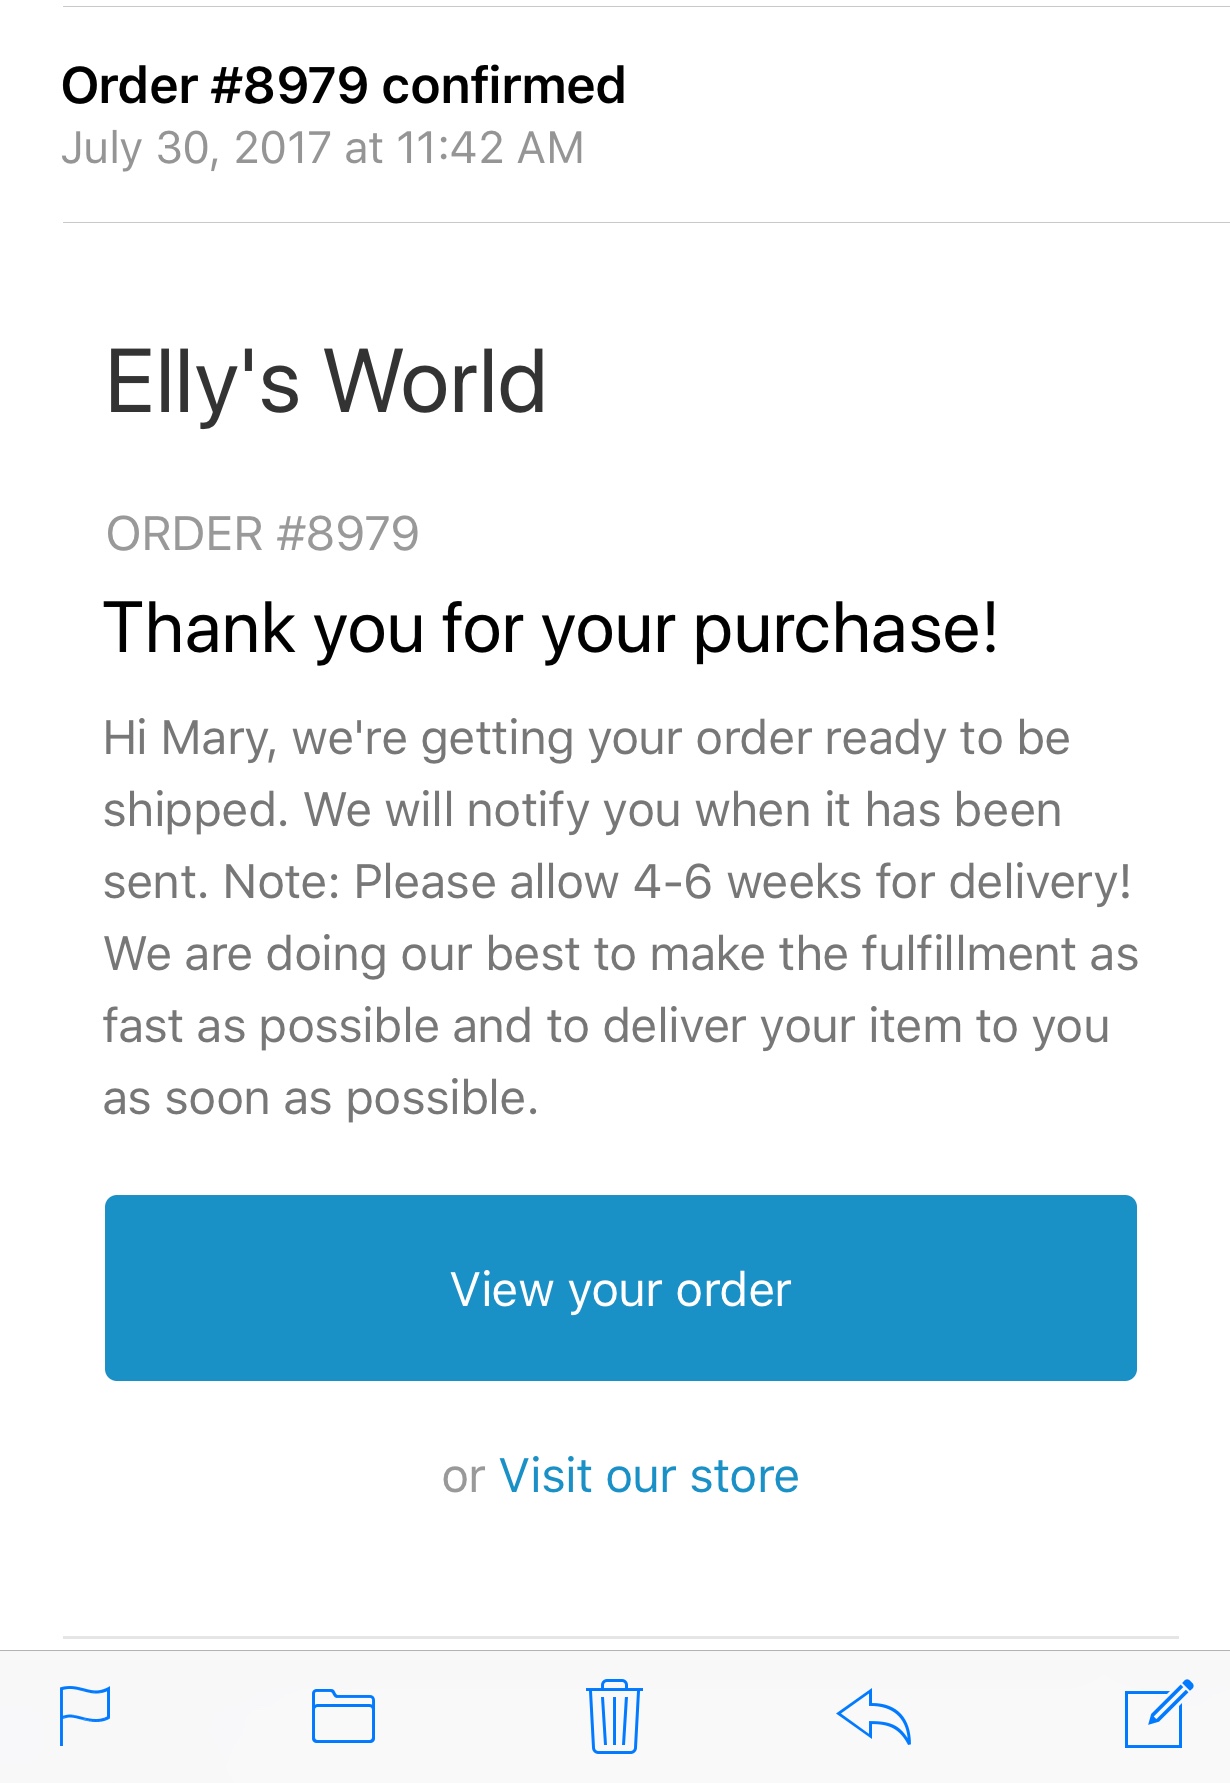 Confirmation from Elly’s World 